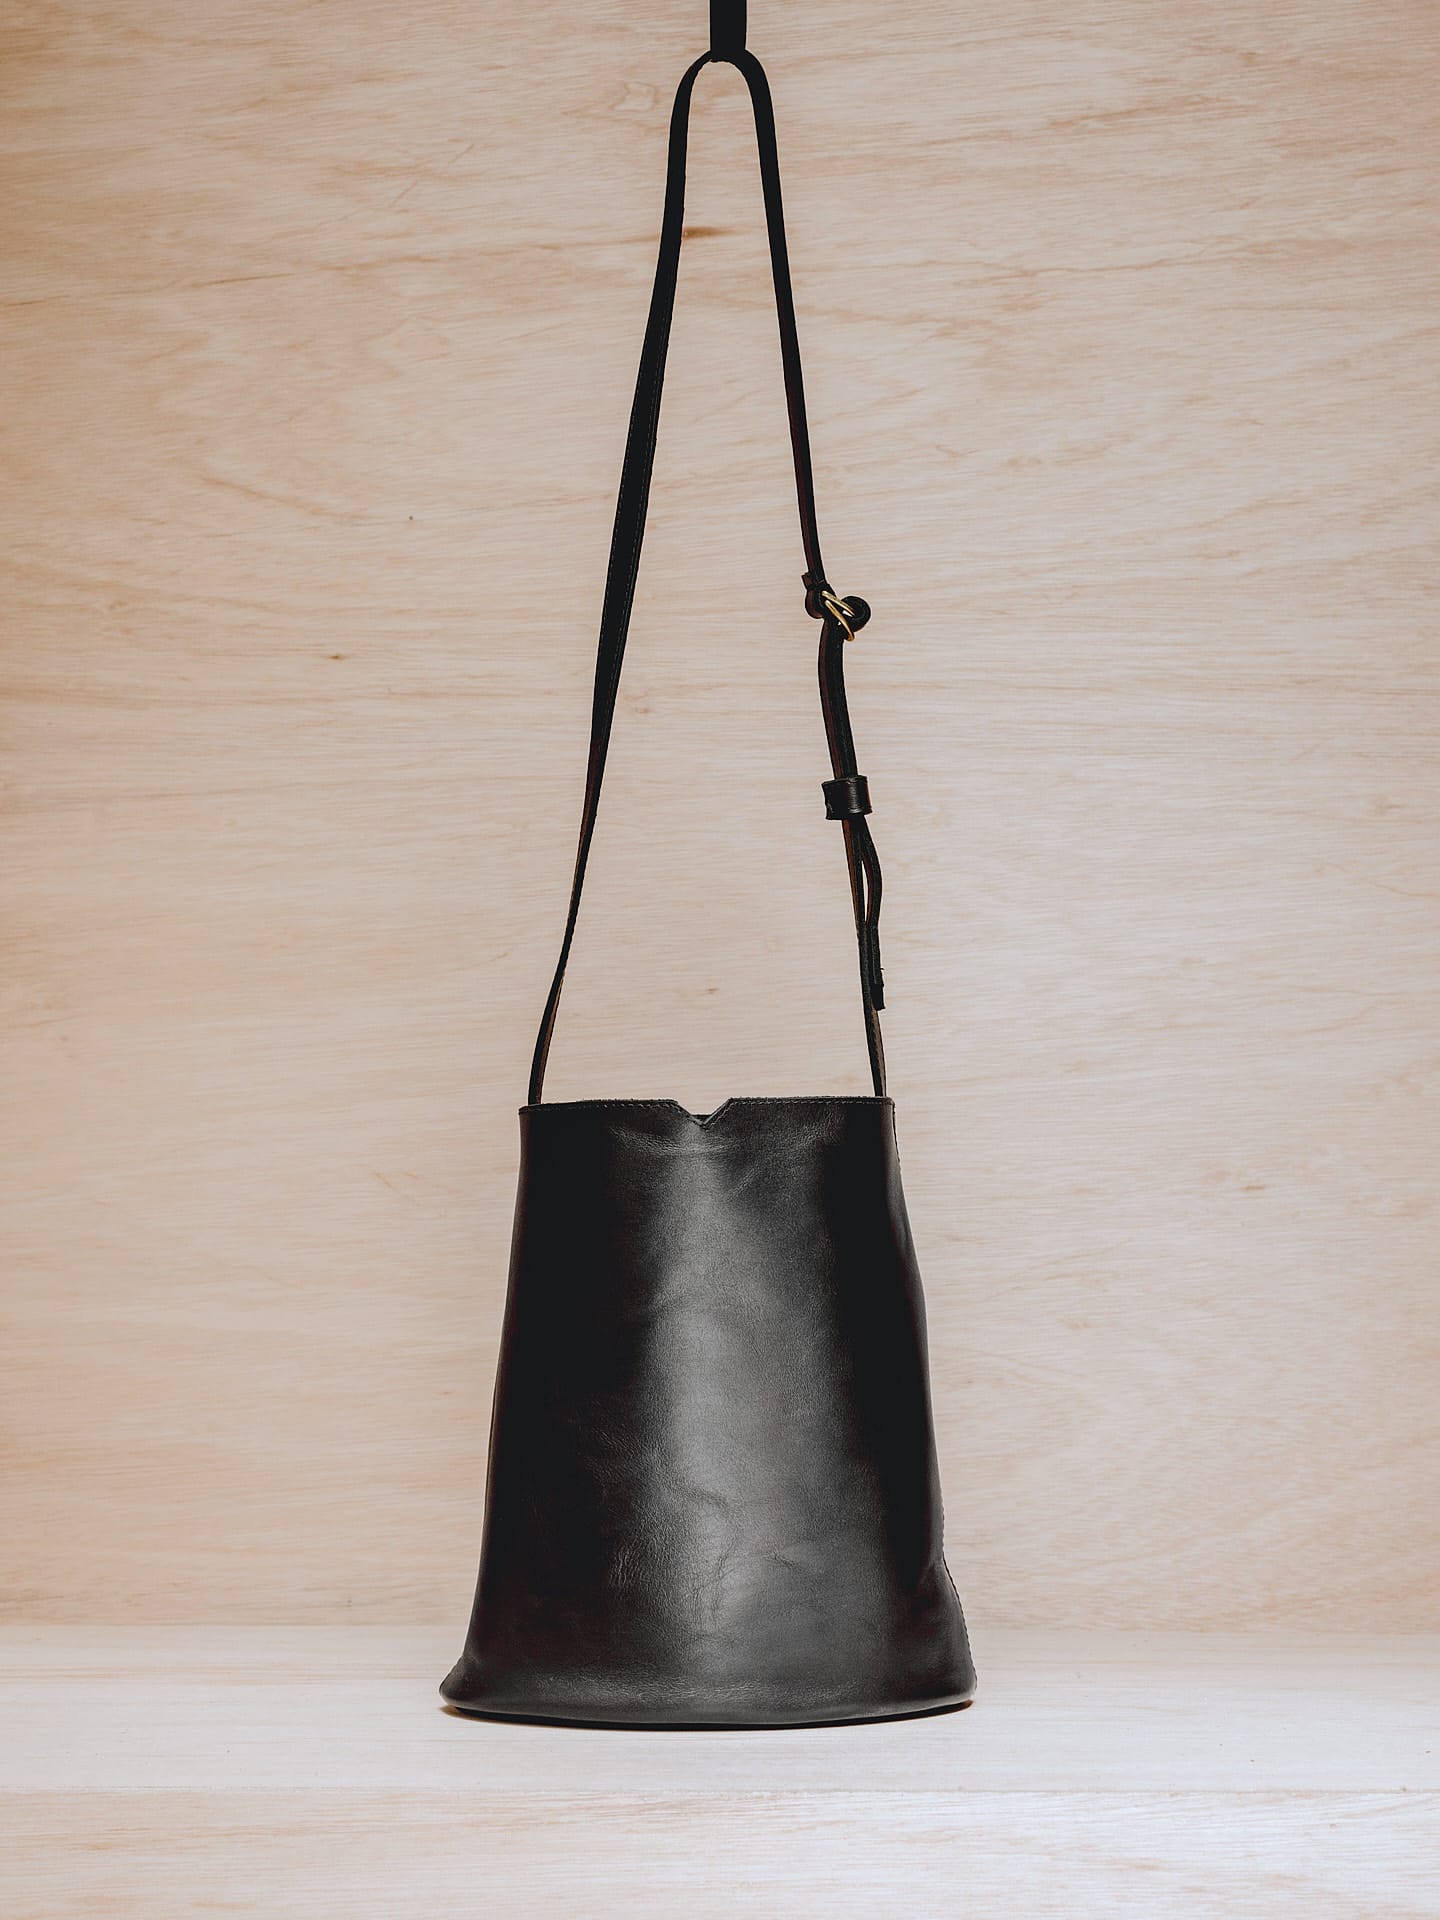 A Lets Dance black leather bucket bag hanging on a wooden wall.